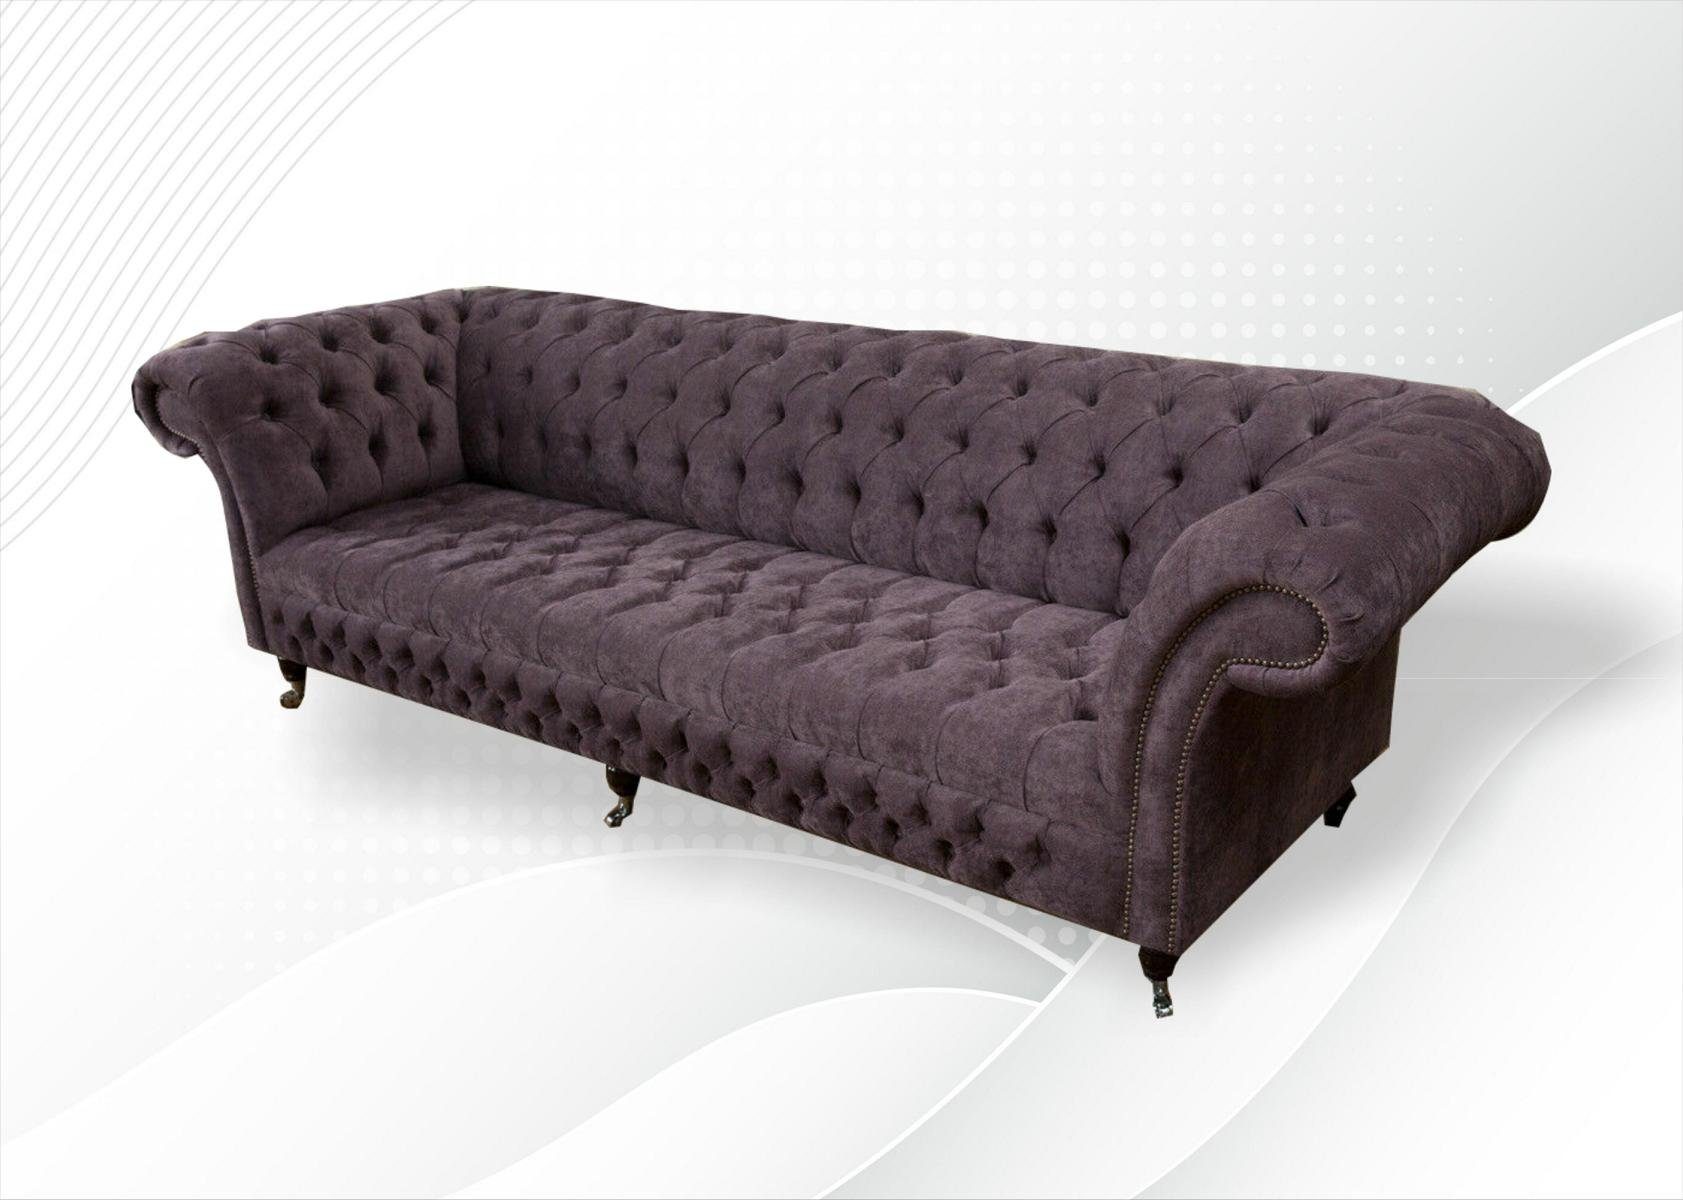 JVmoebel Sofa xxl Big Europe 265cm Sitzer Couch Leder, Polster Sofa in Made Chesterfield Sofas 4